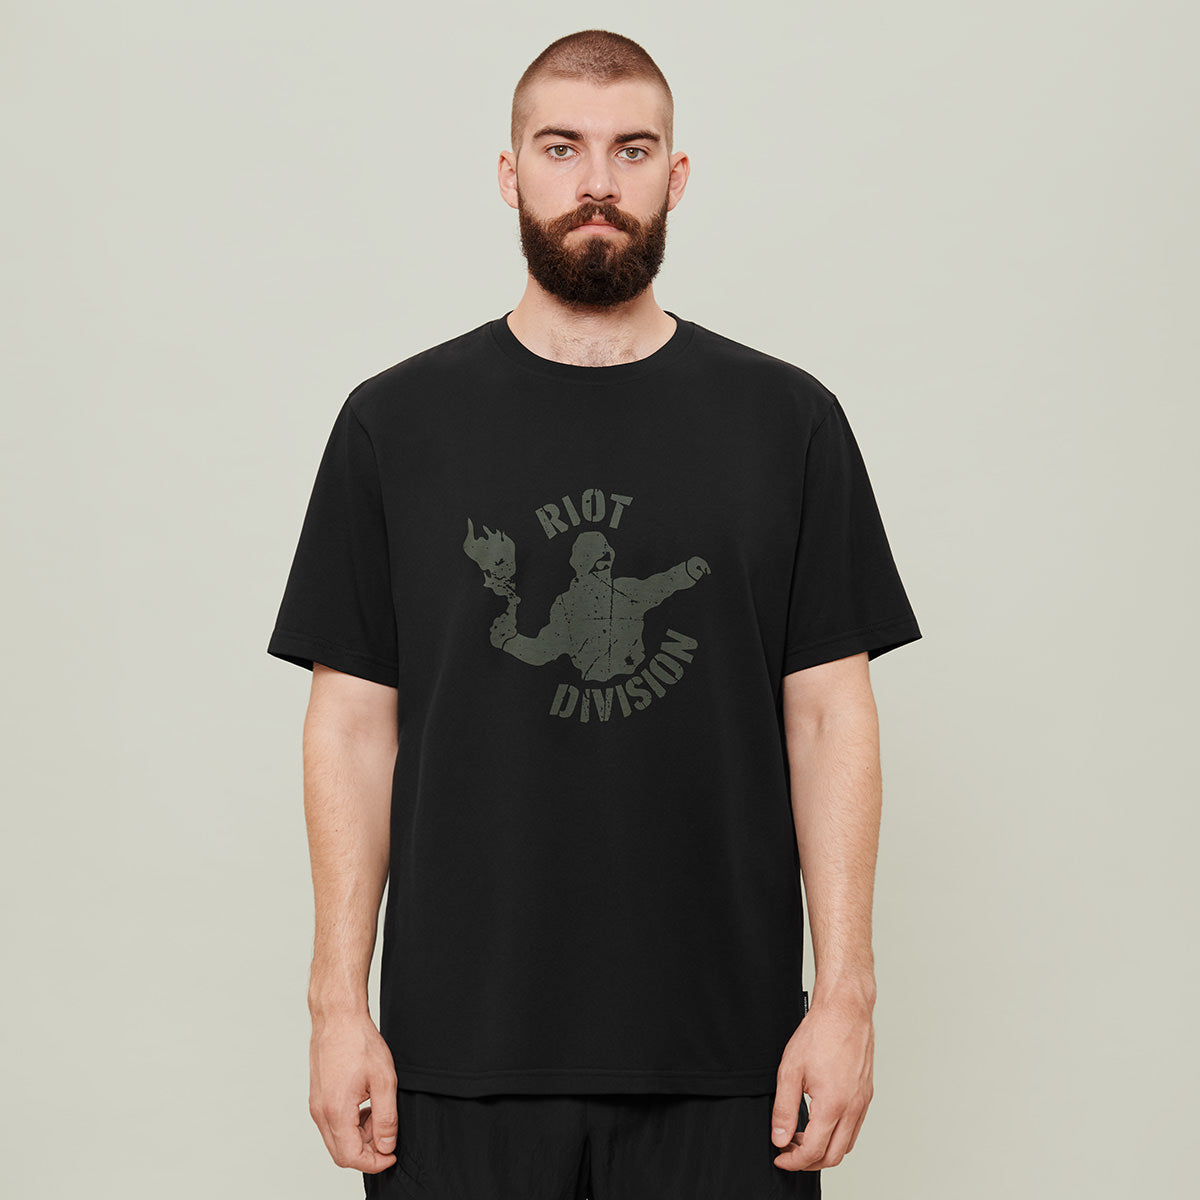 Shards Of Wall T-Shirt RD-SOWTS BLACK